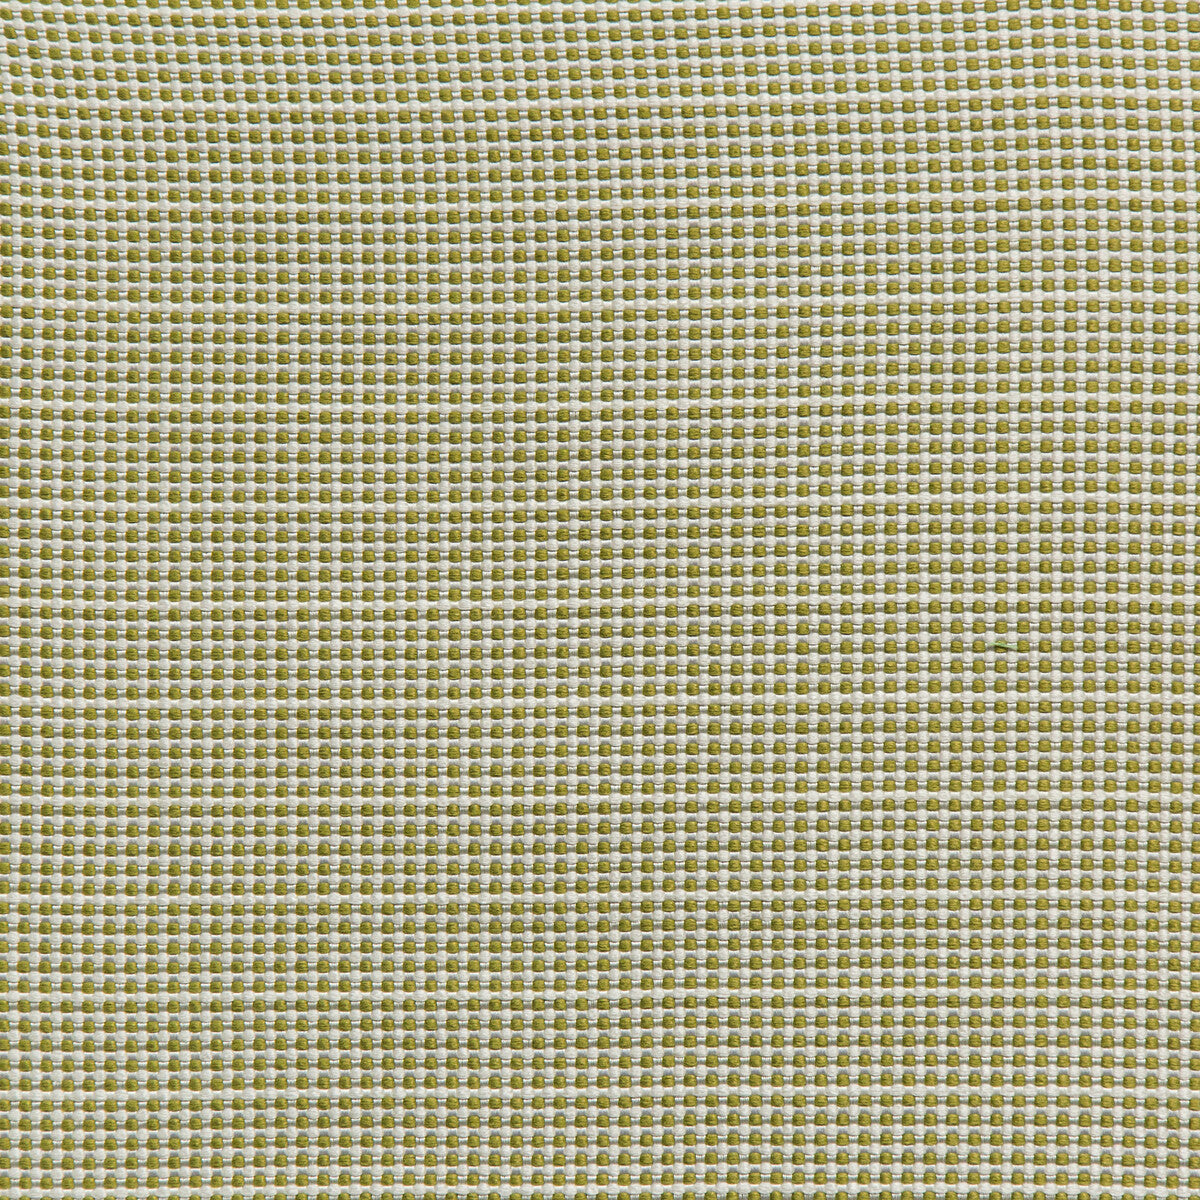 Portique fabric in palm green color - pattern 2019130.301.0 - by Lee Jofa